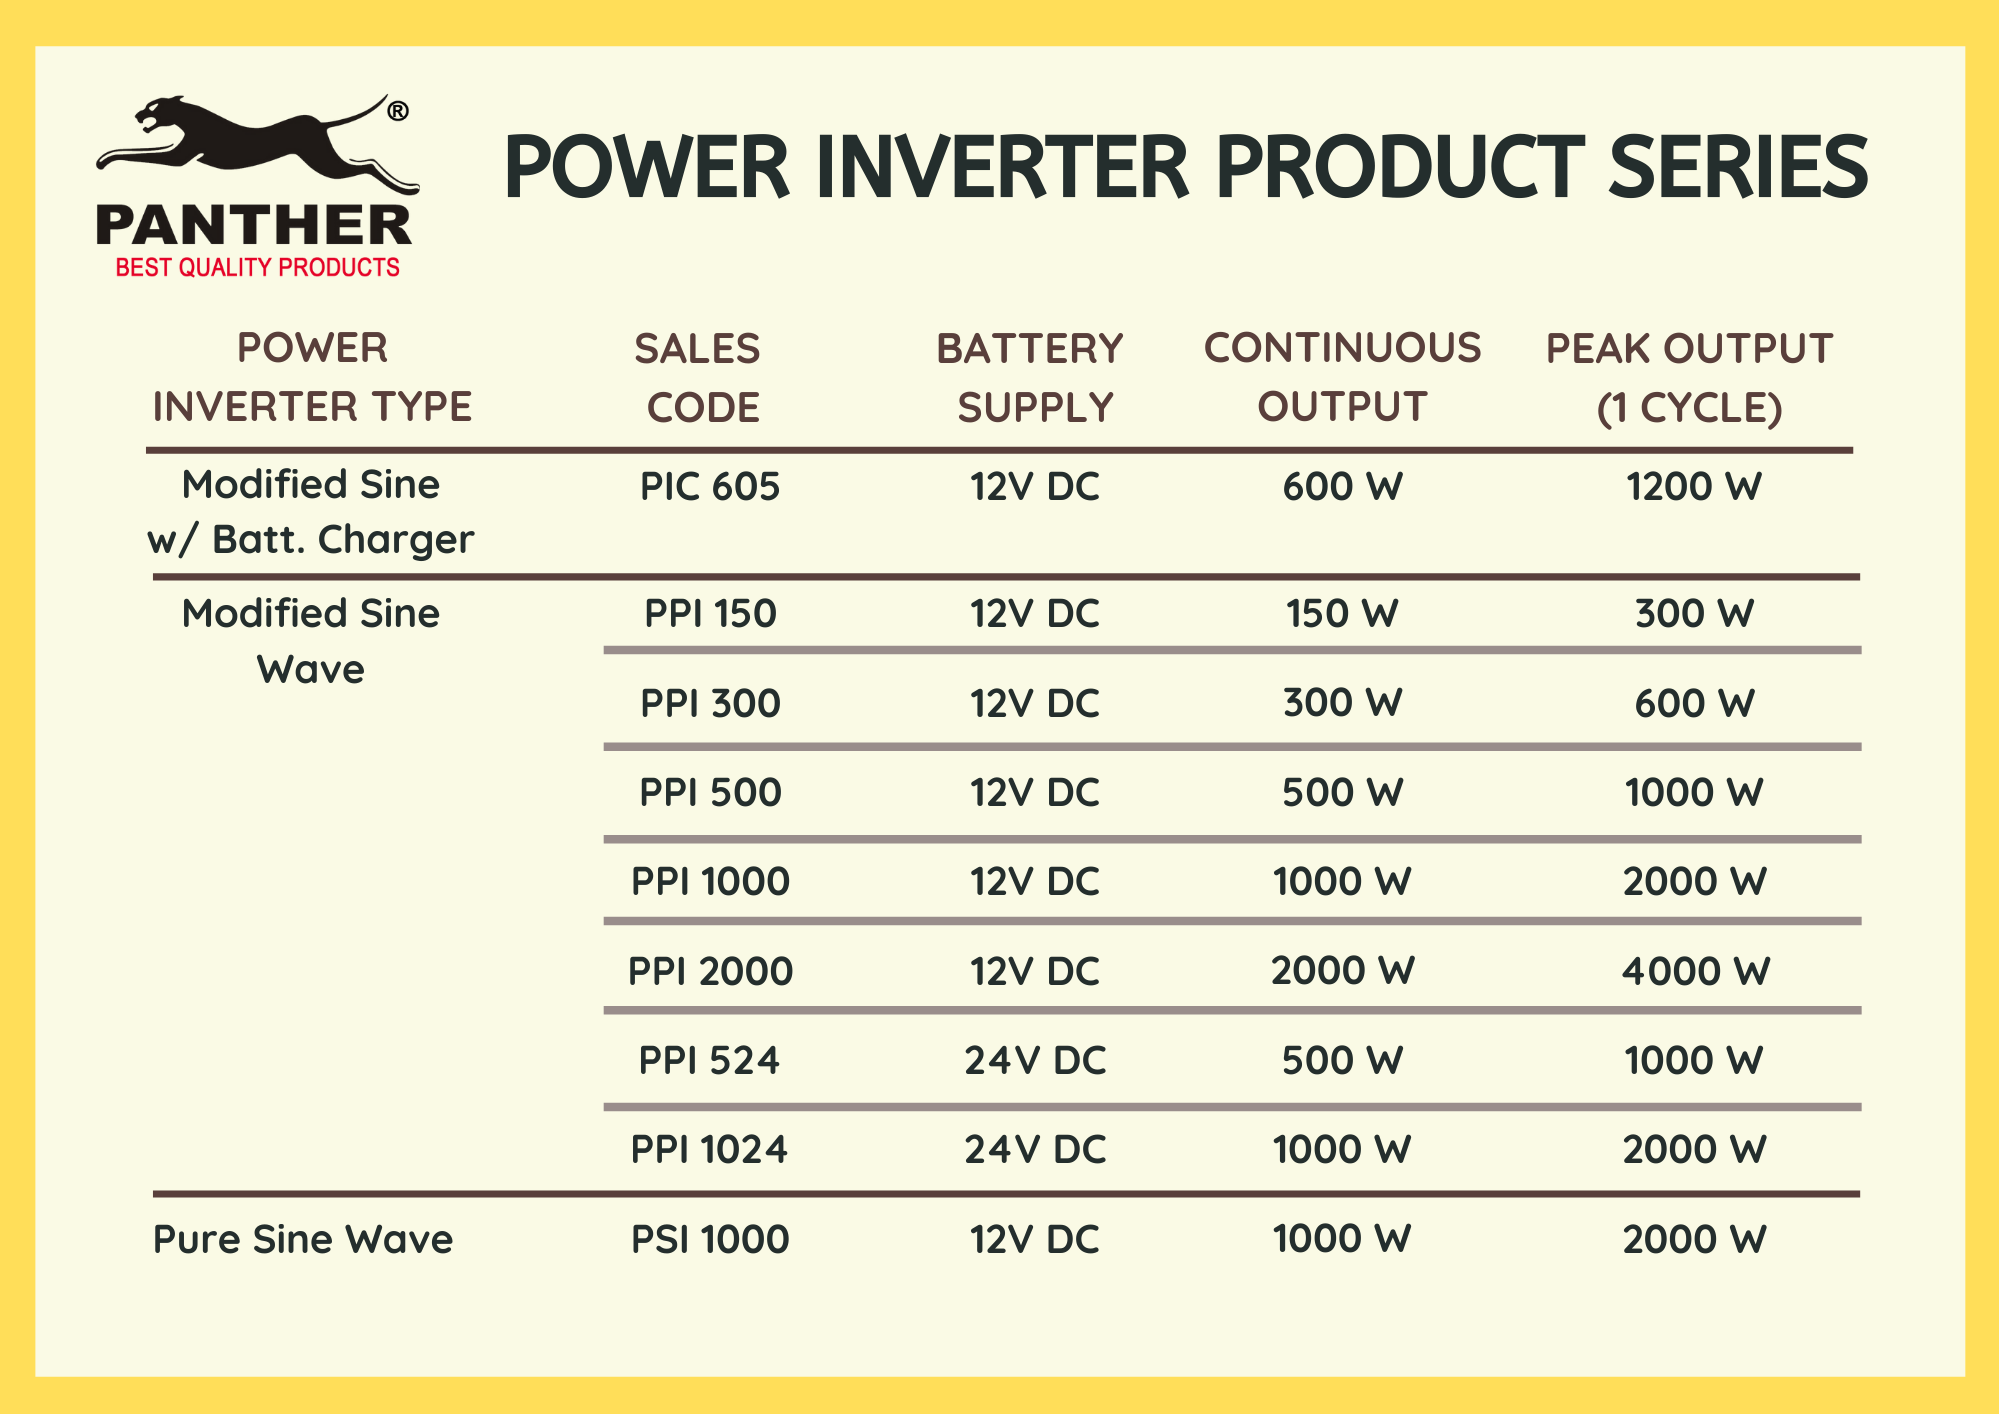 Available Panther Power Inverter models to choose from